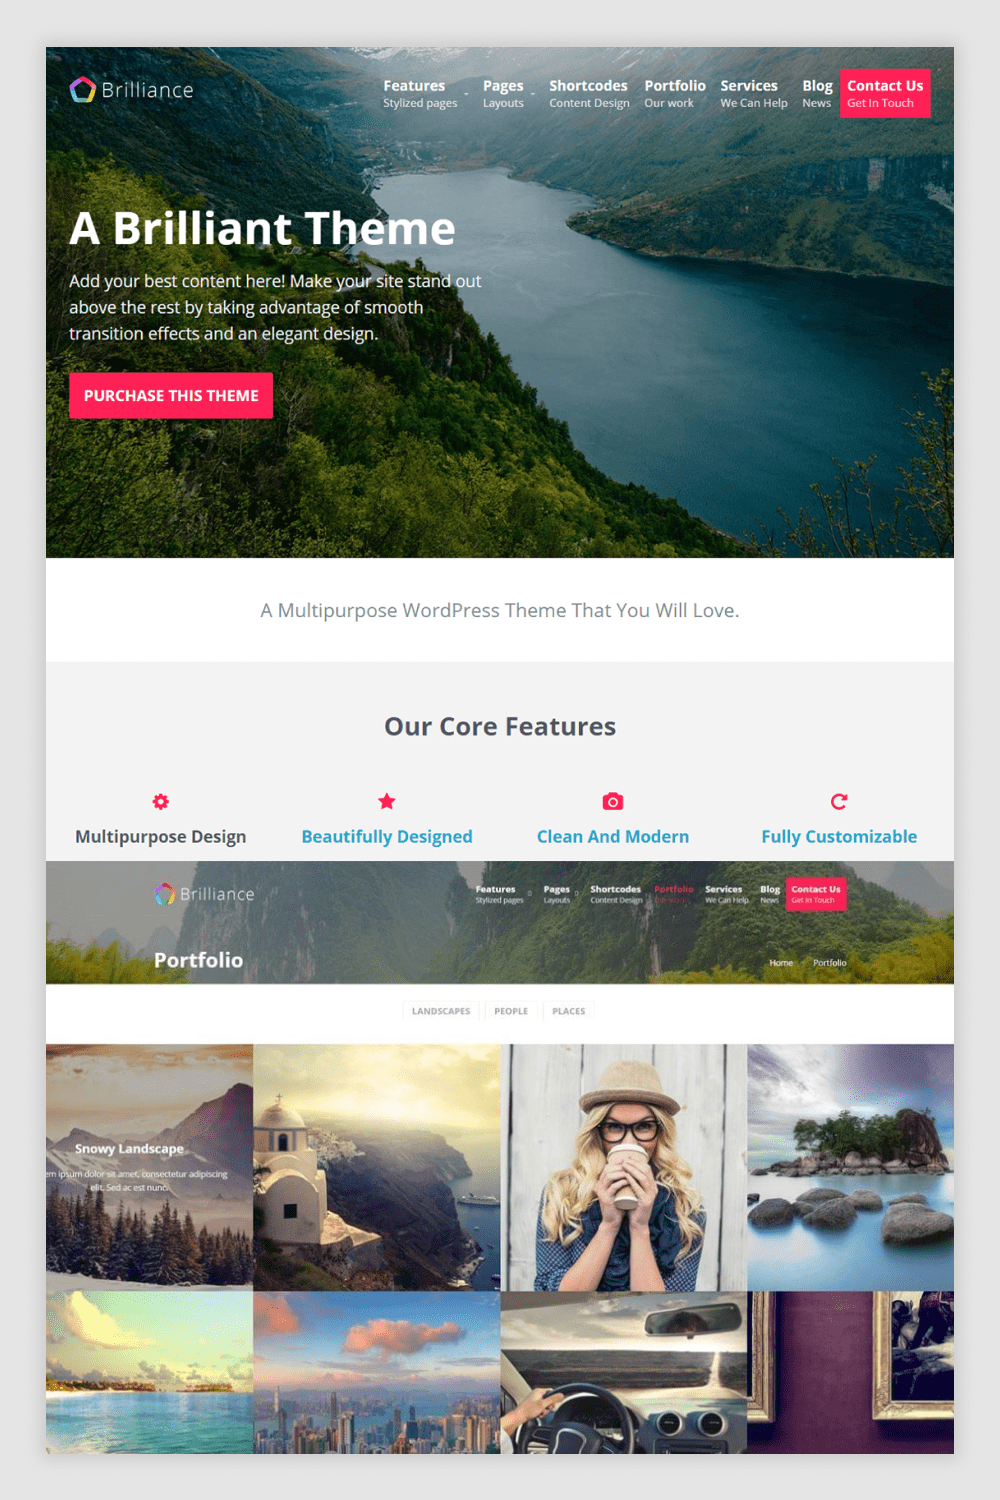 Landing page screenshot with slider, benefits and photo collage.